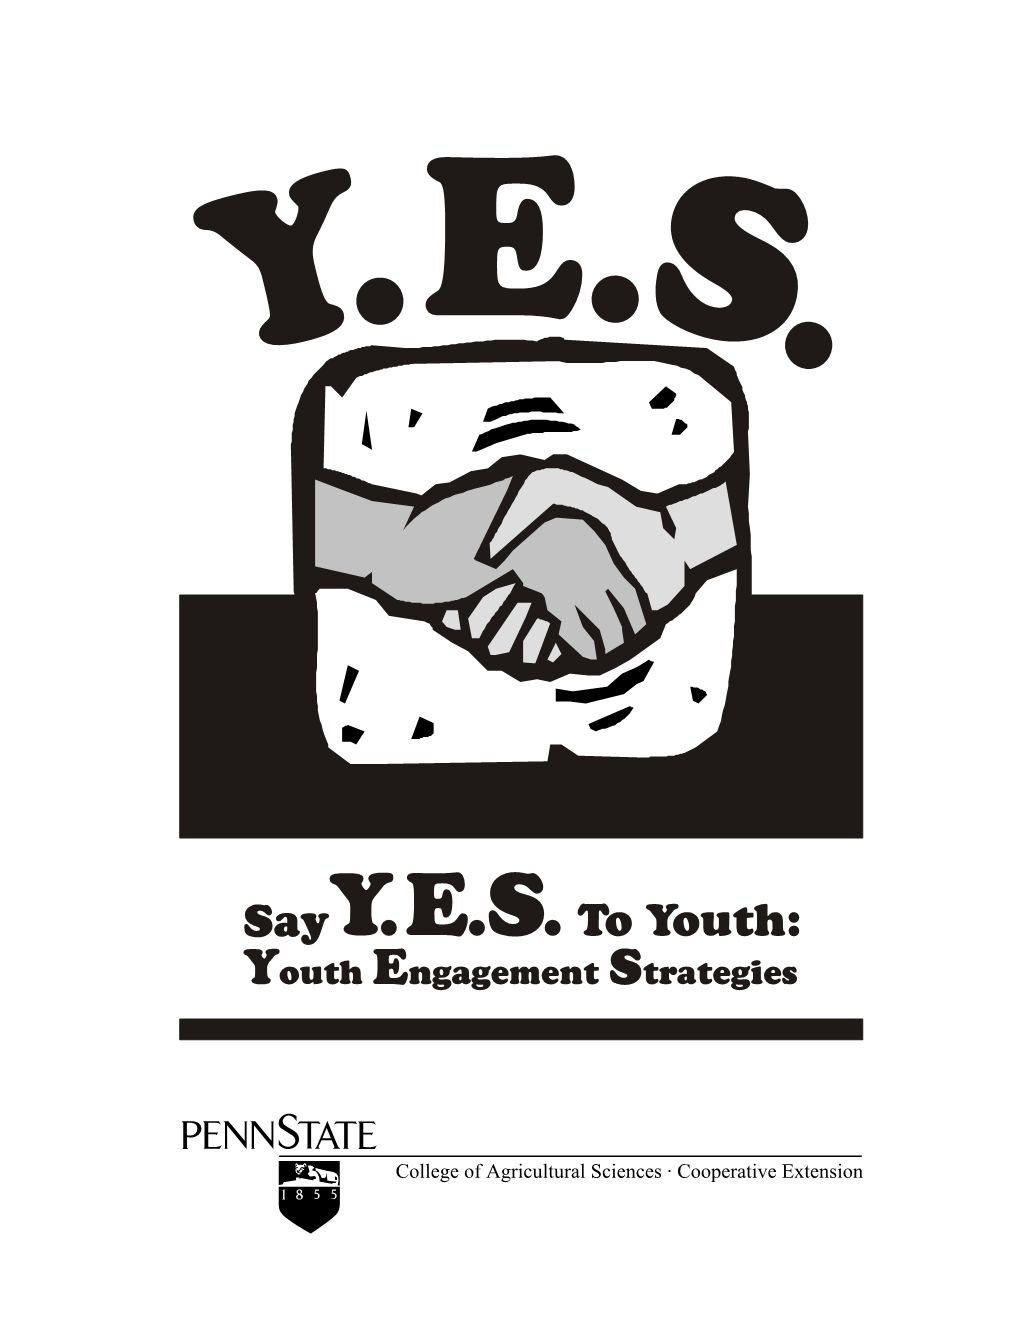 Say Y.E.S. to Youth: Youth Engagement Strategies